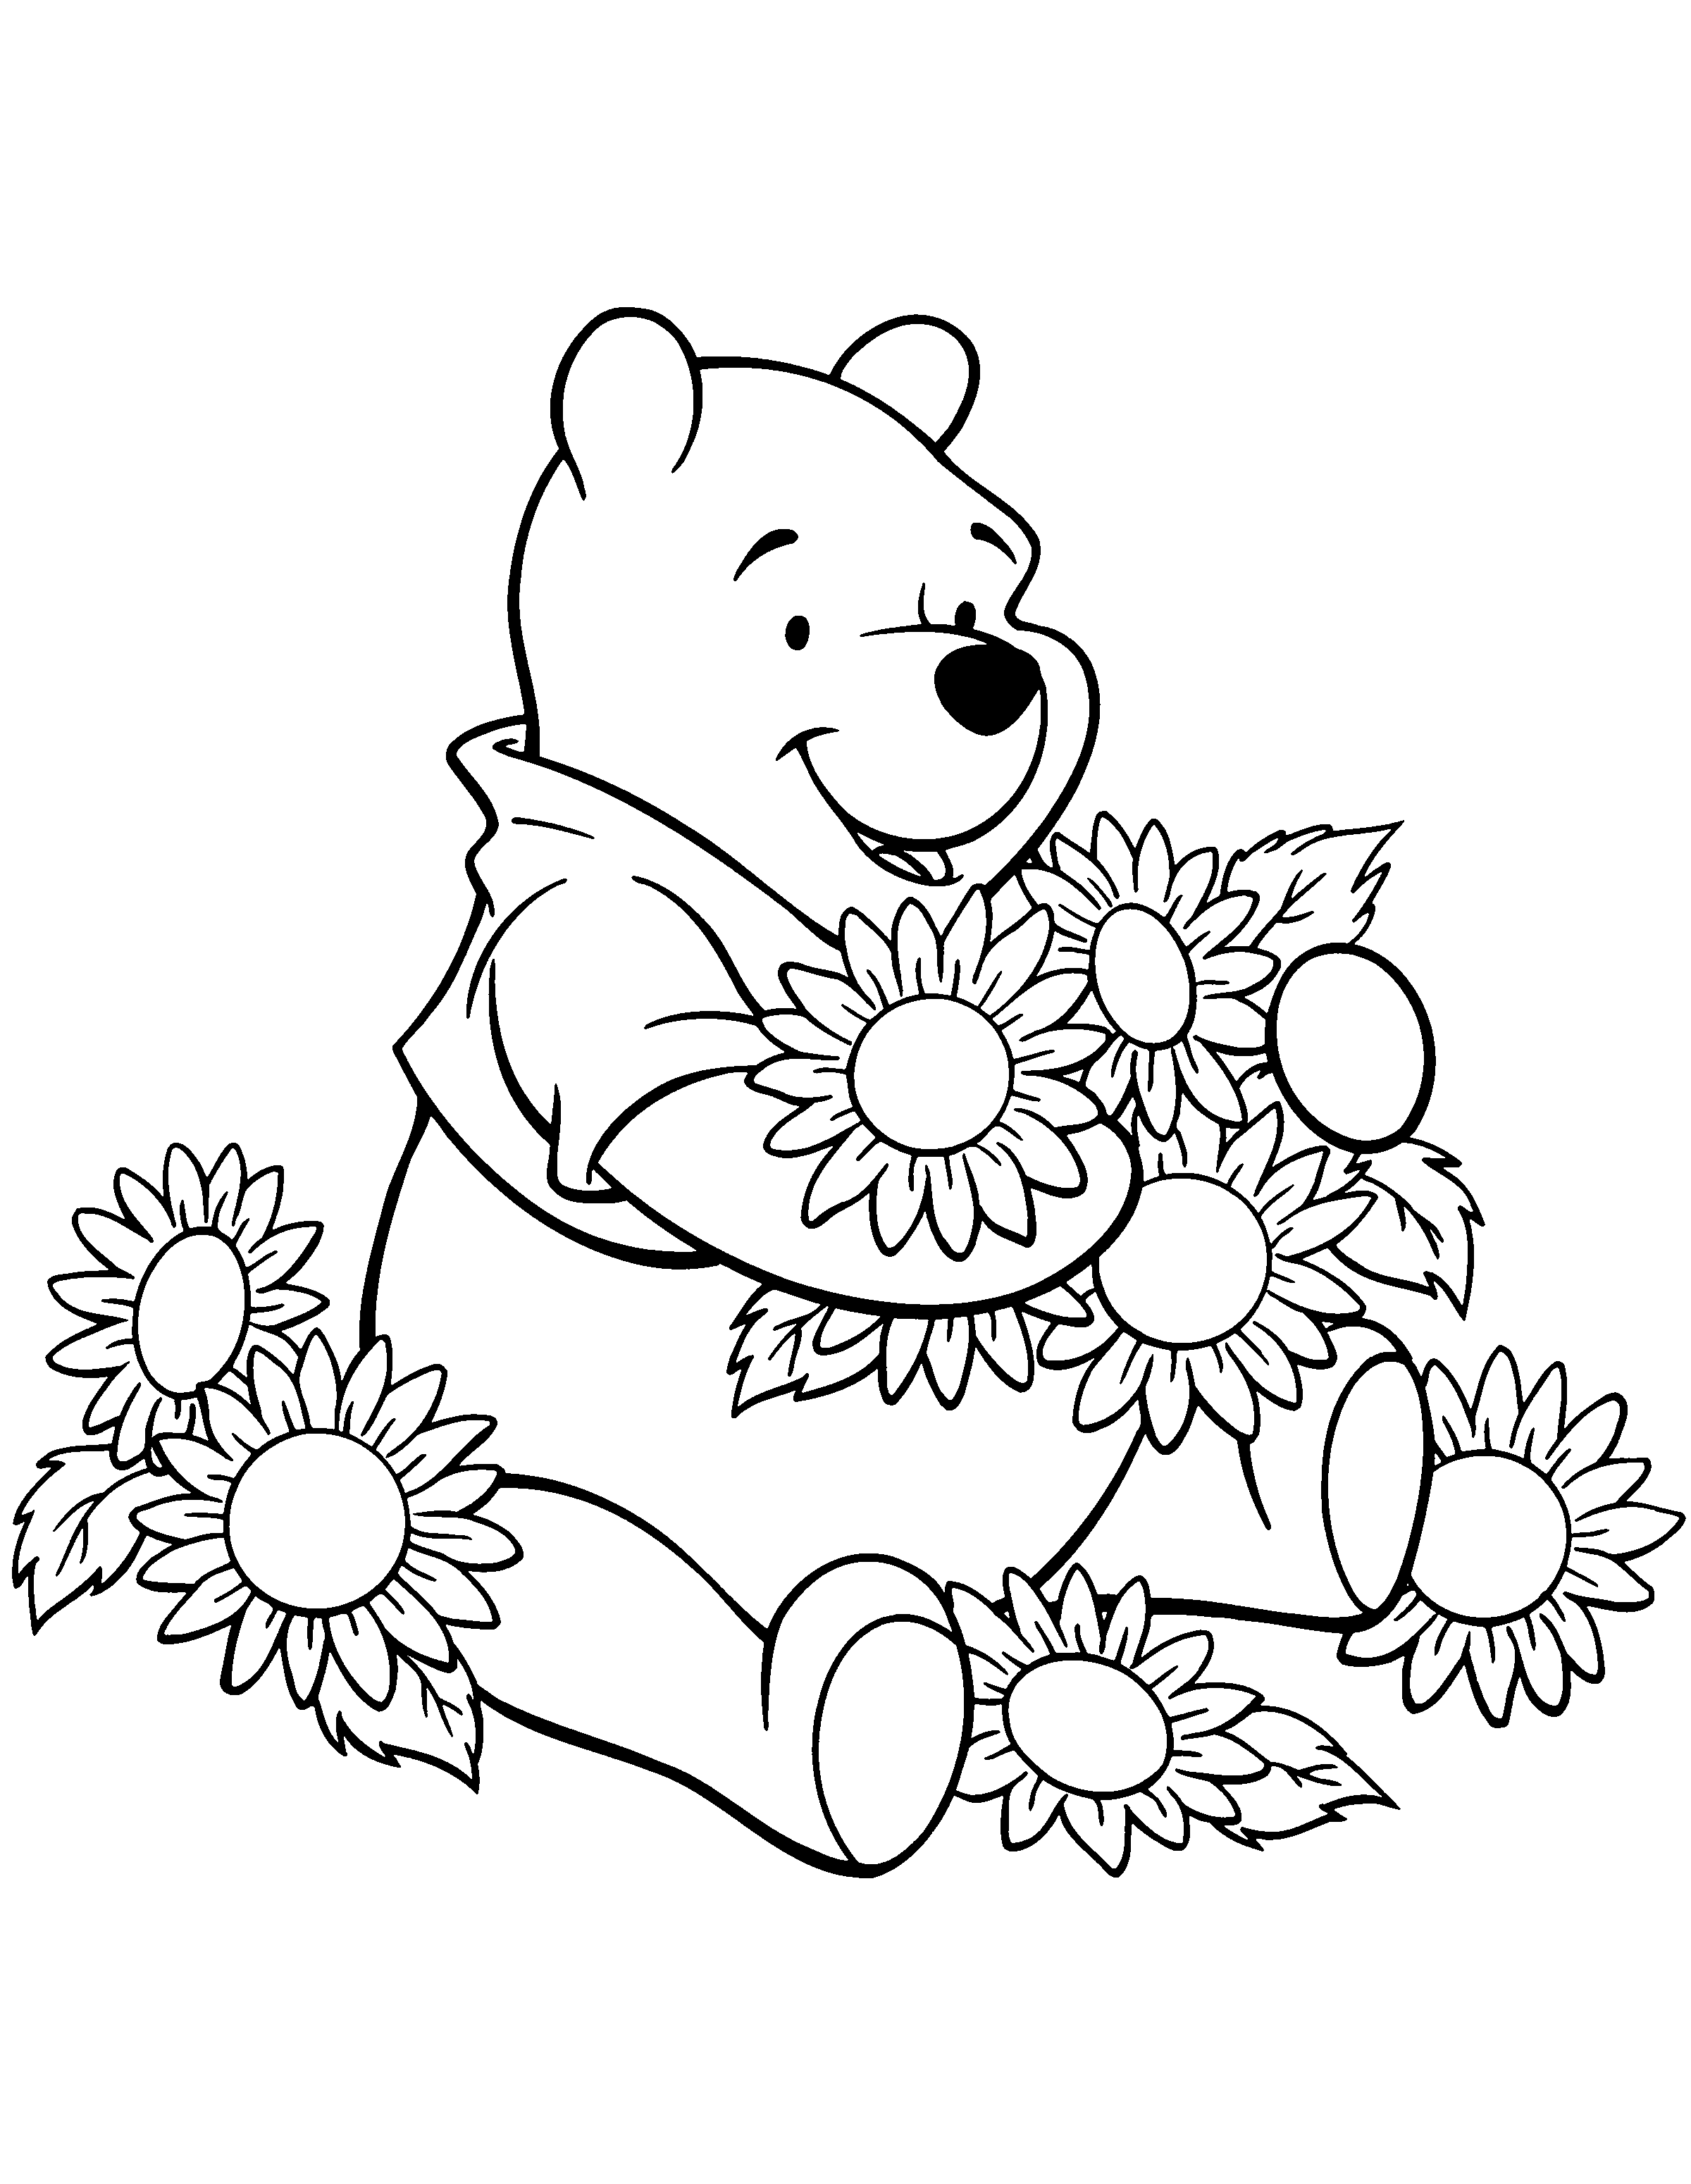 winnie-the-pooh-coloring-pages-11-coloring-kids